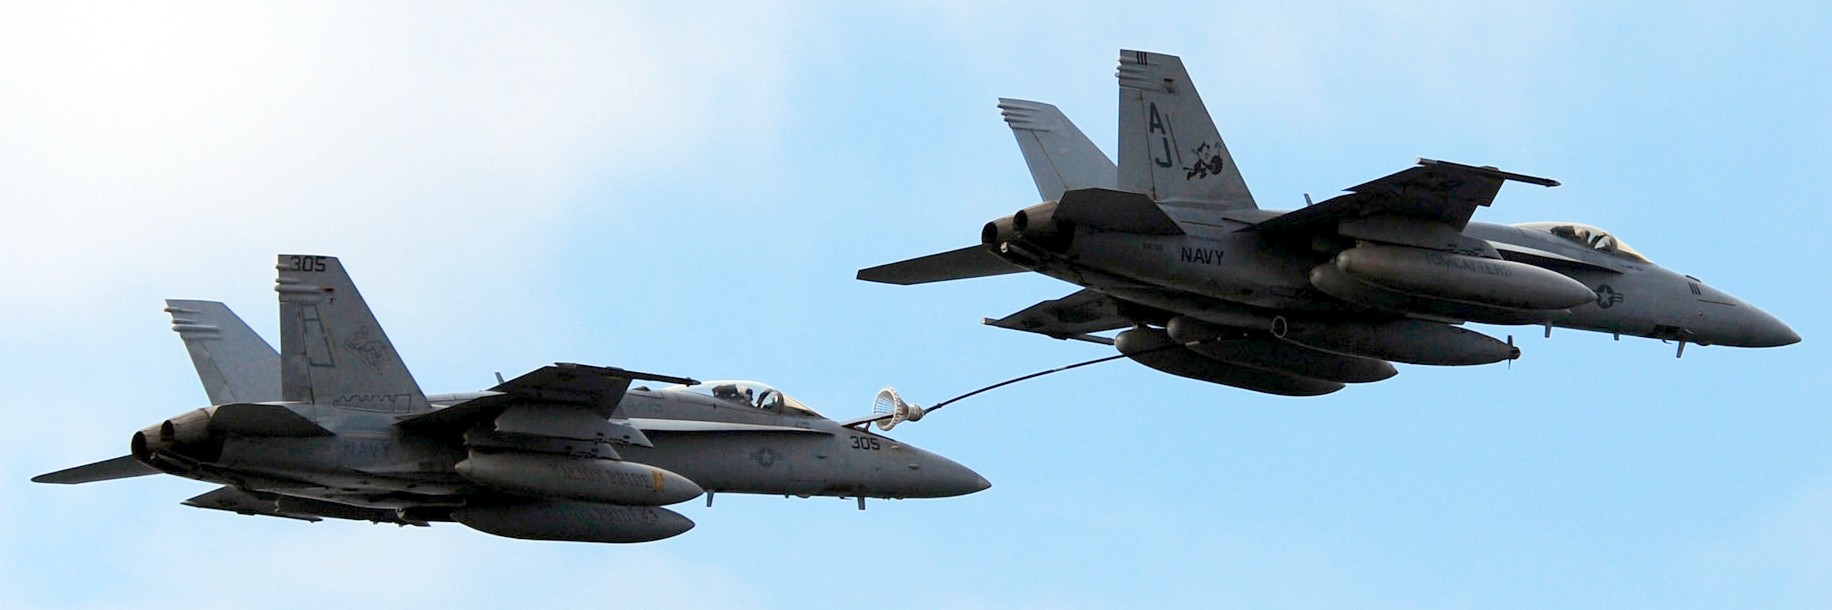 vfa-31 tomcatters strike fighter squadron f/a-18e super hornet us navy cvw-8 refueling buddy-buddy 54p